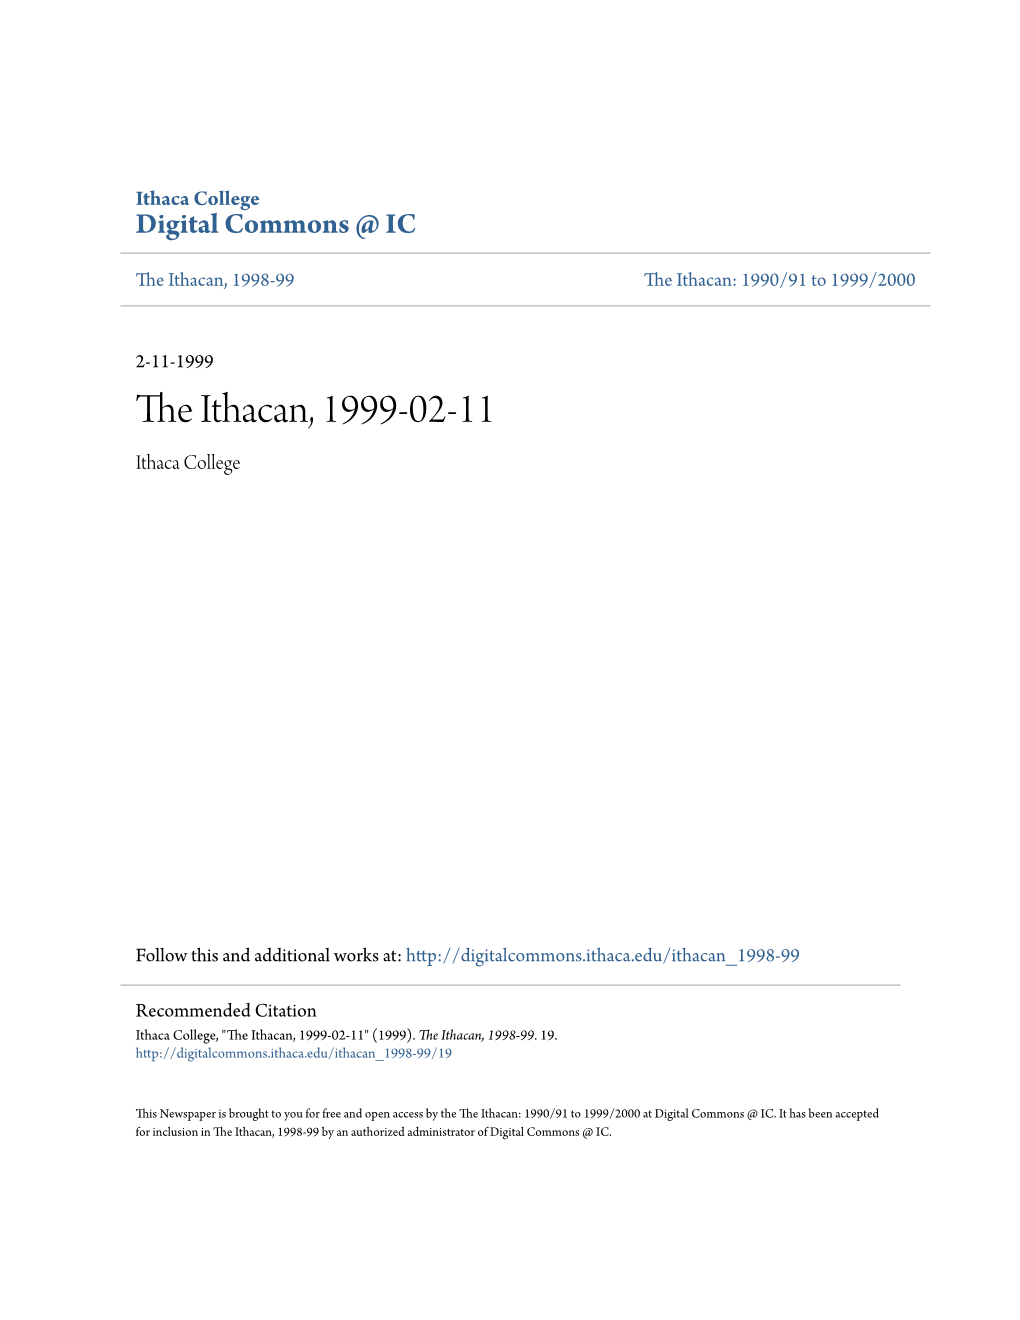 The Ithacan, 1999-02-11